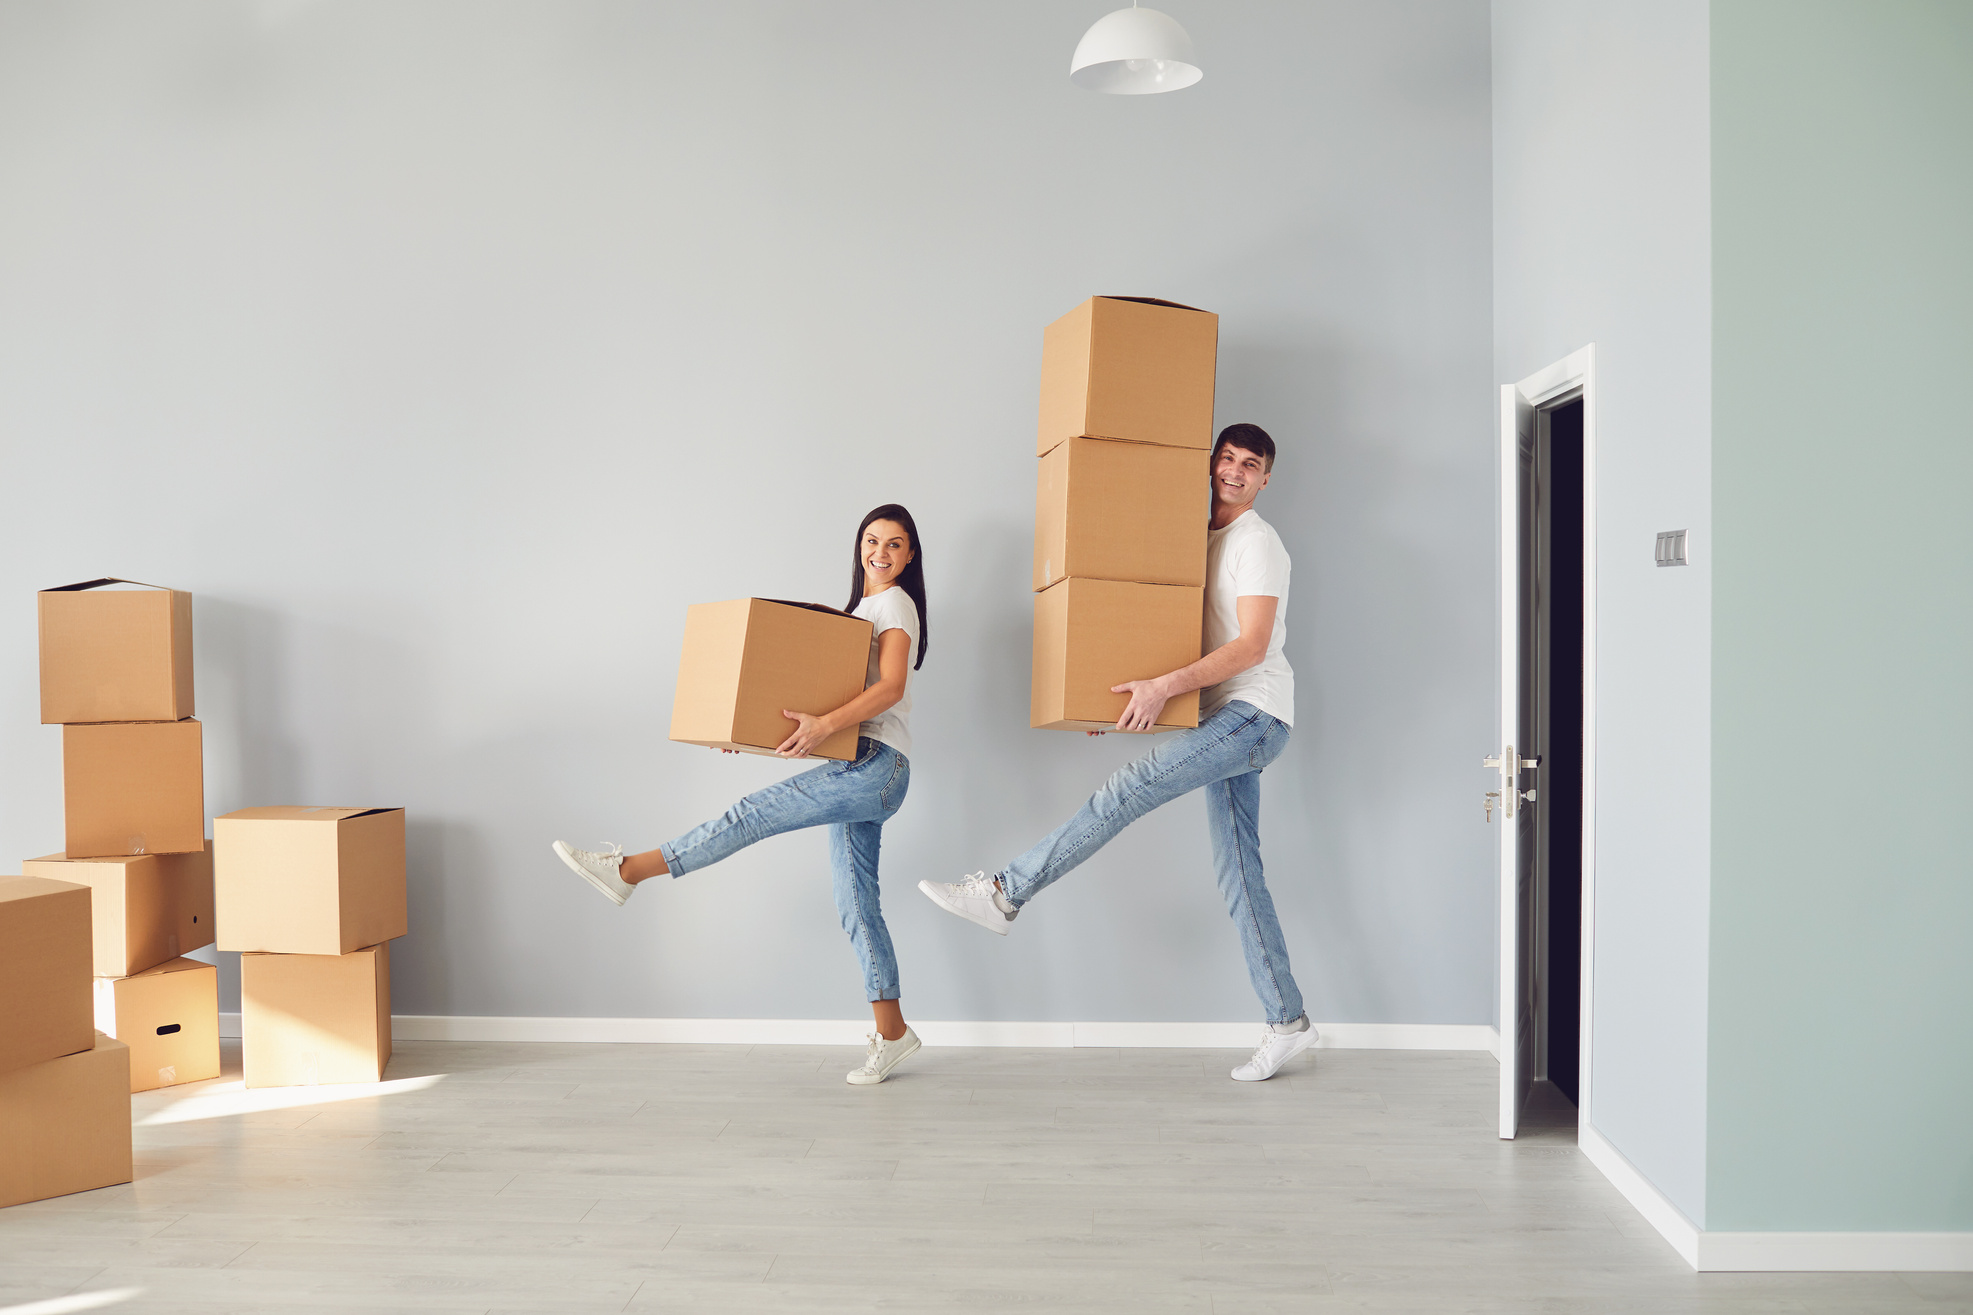 Funny Middle-Aged Couple with Cardboard Boxes Smiling in a New Apartment.